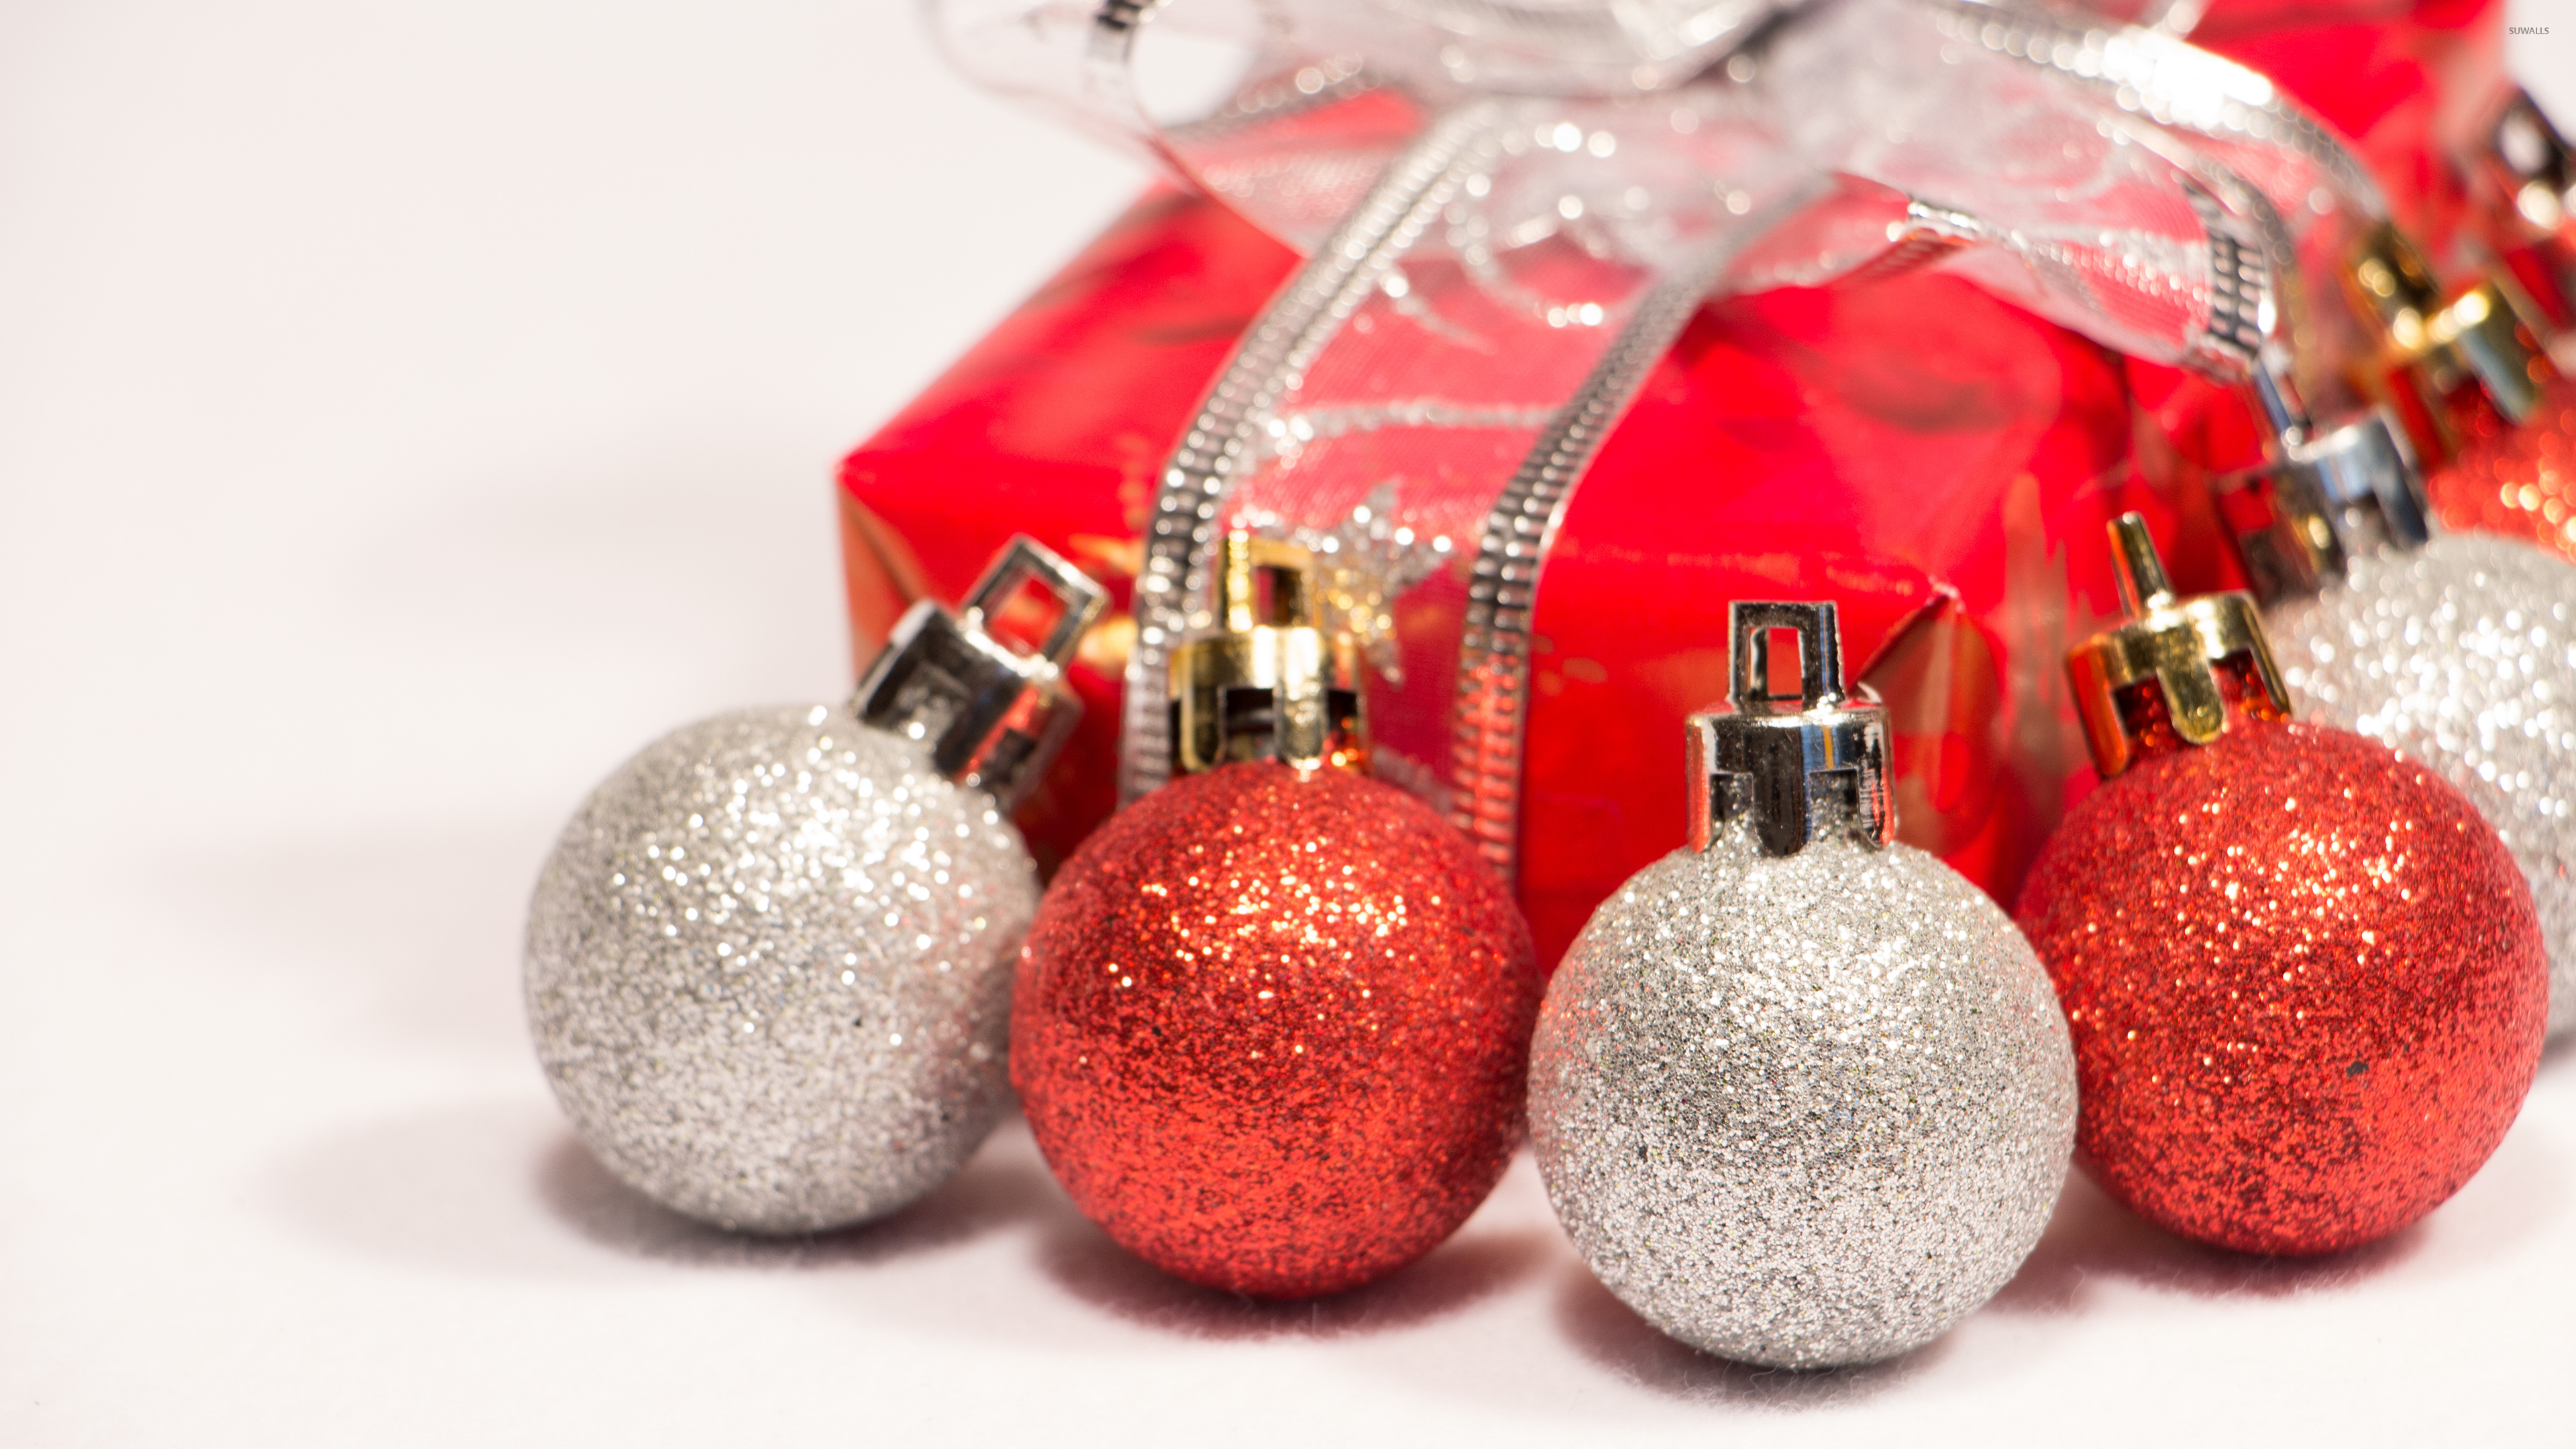 Red and silver baubles with a Christmas present wallpaper wallpaper